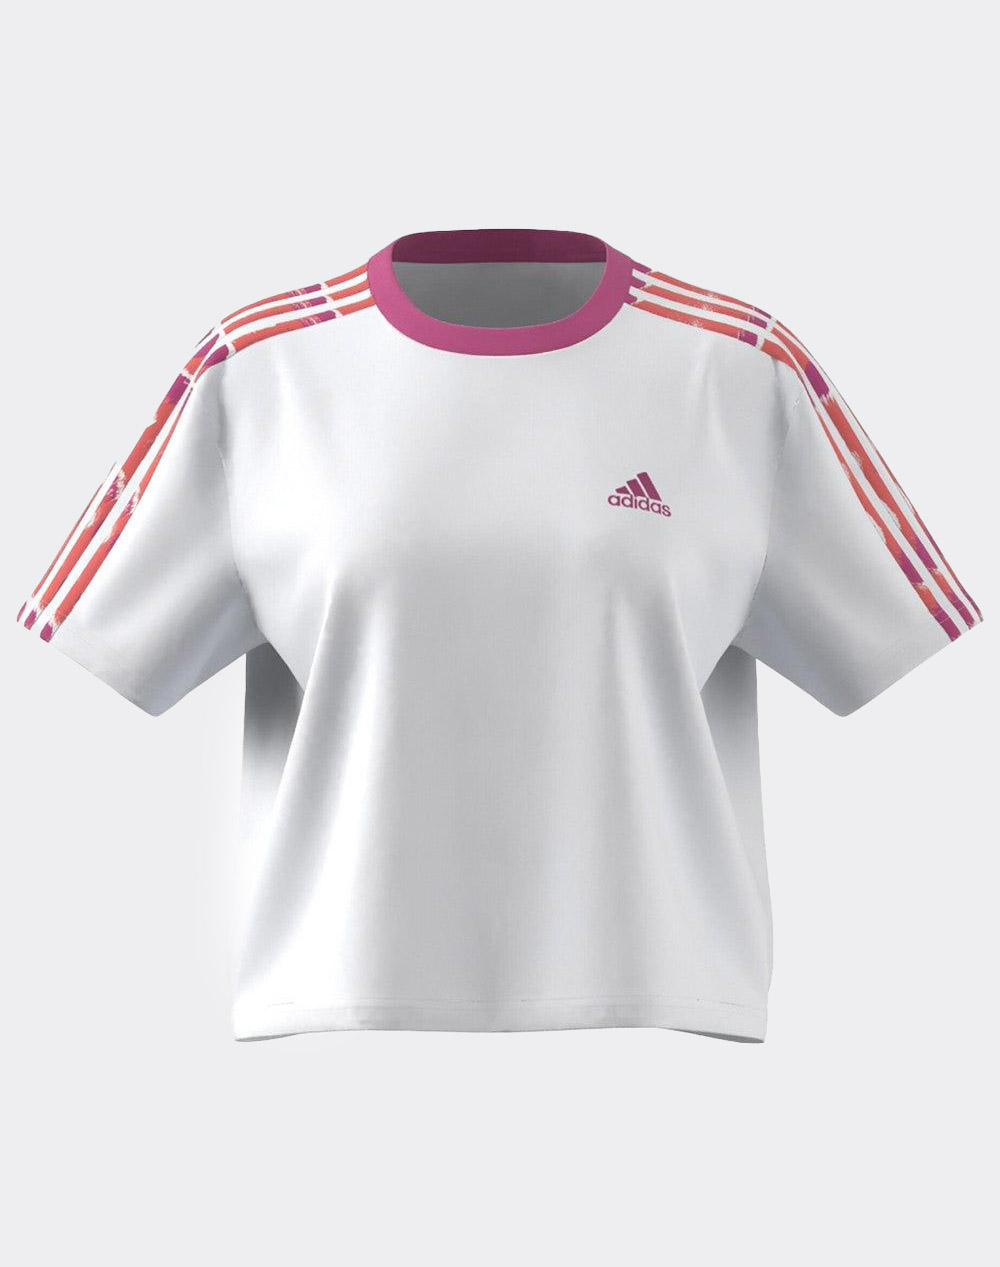 ADIDAS TOP W CR - TOP 3S White